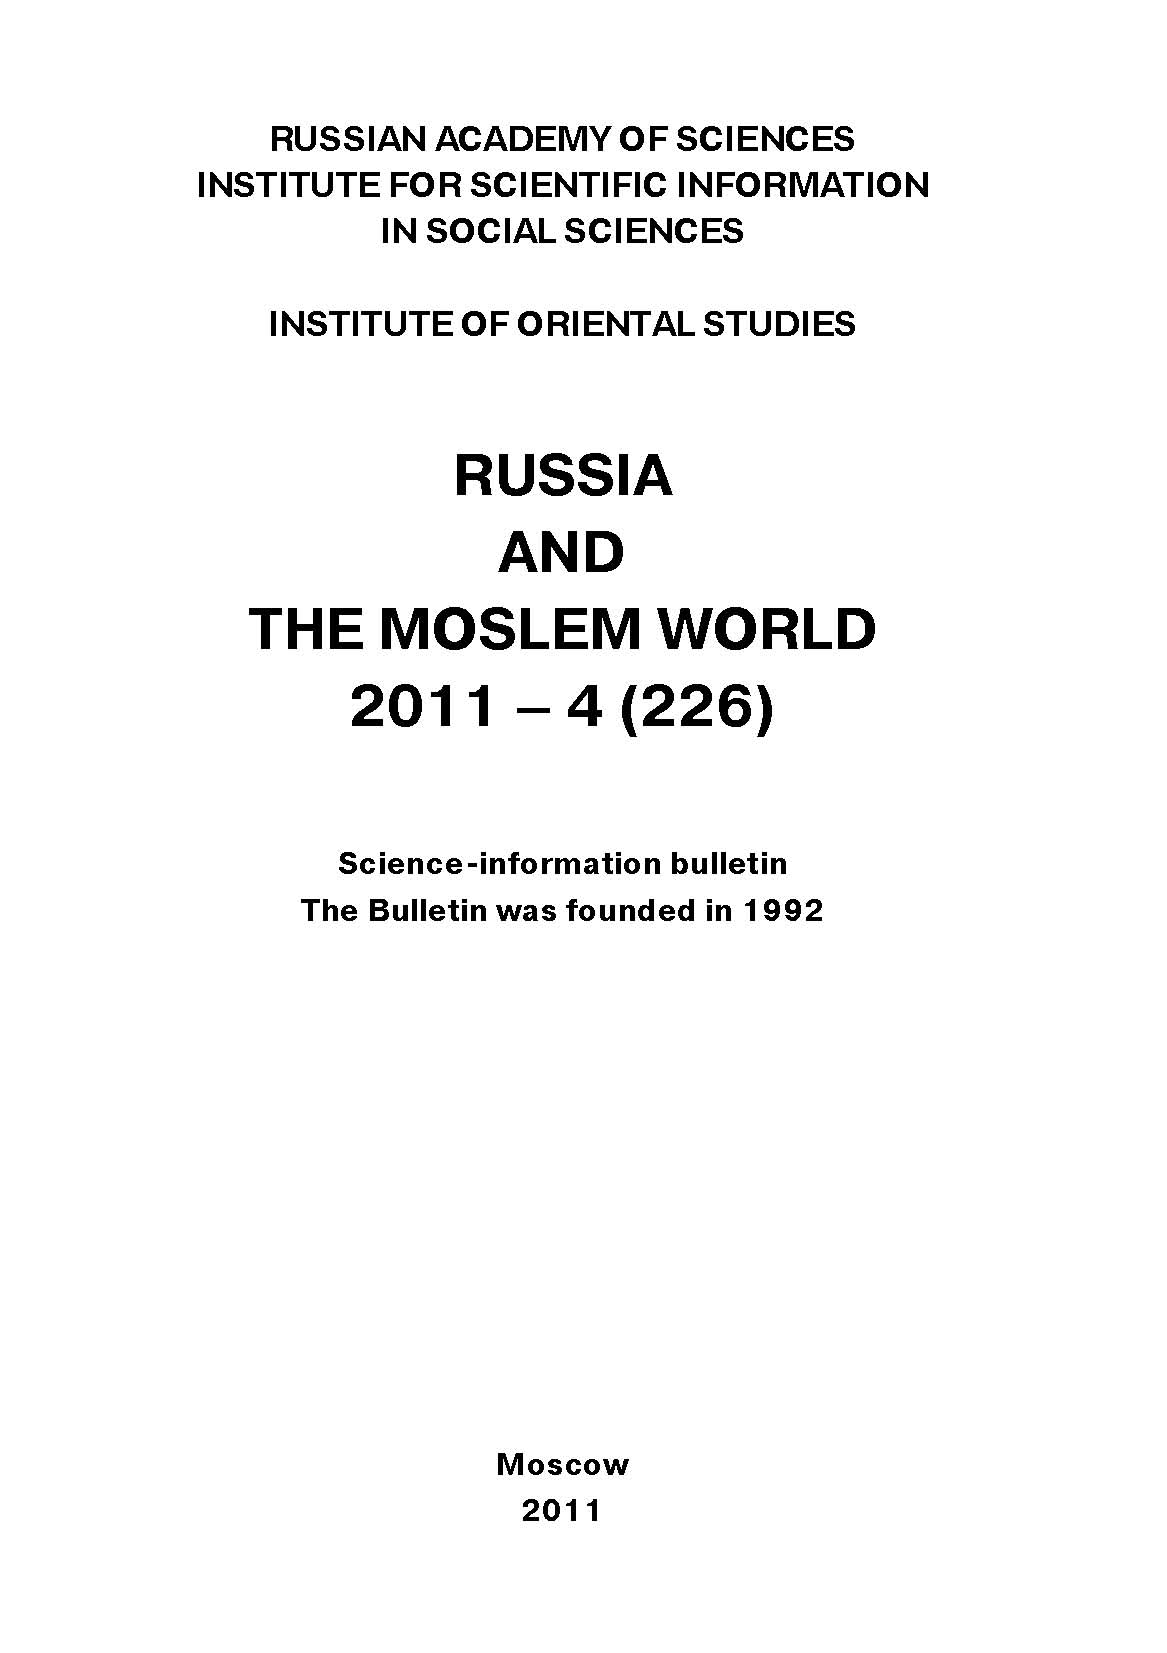 Russia and the Moslem World№ 04 / 2011